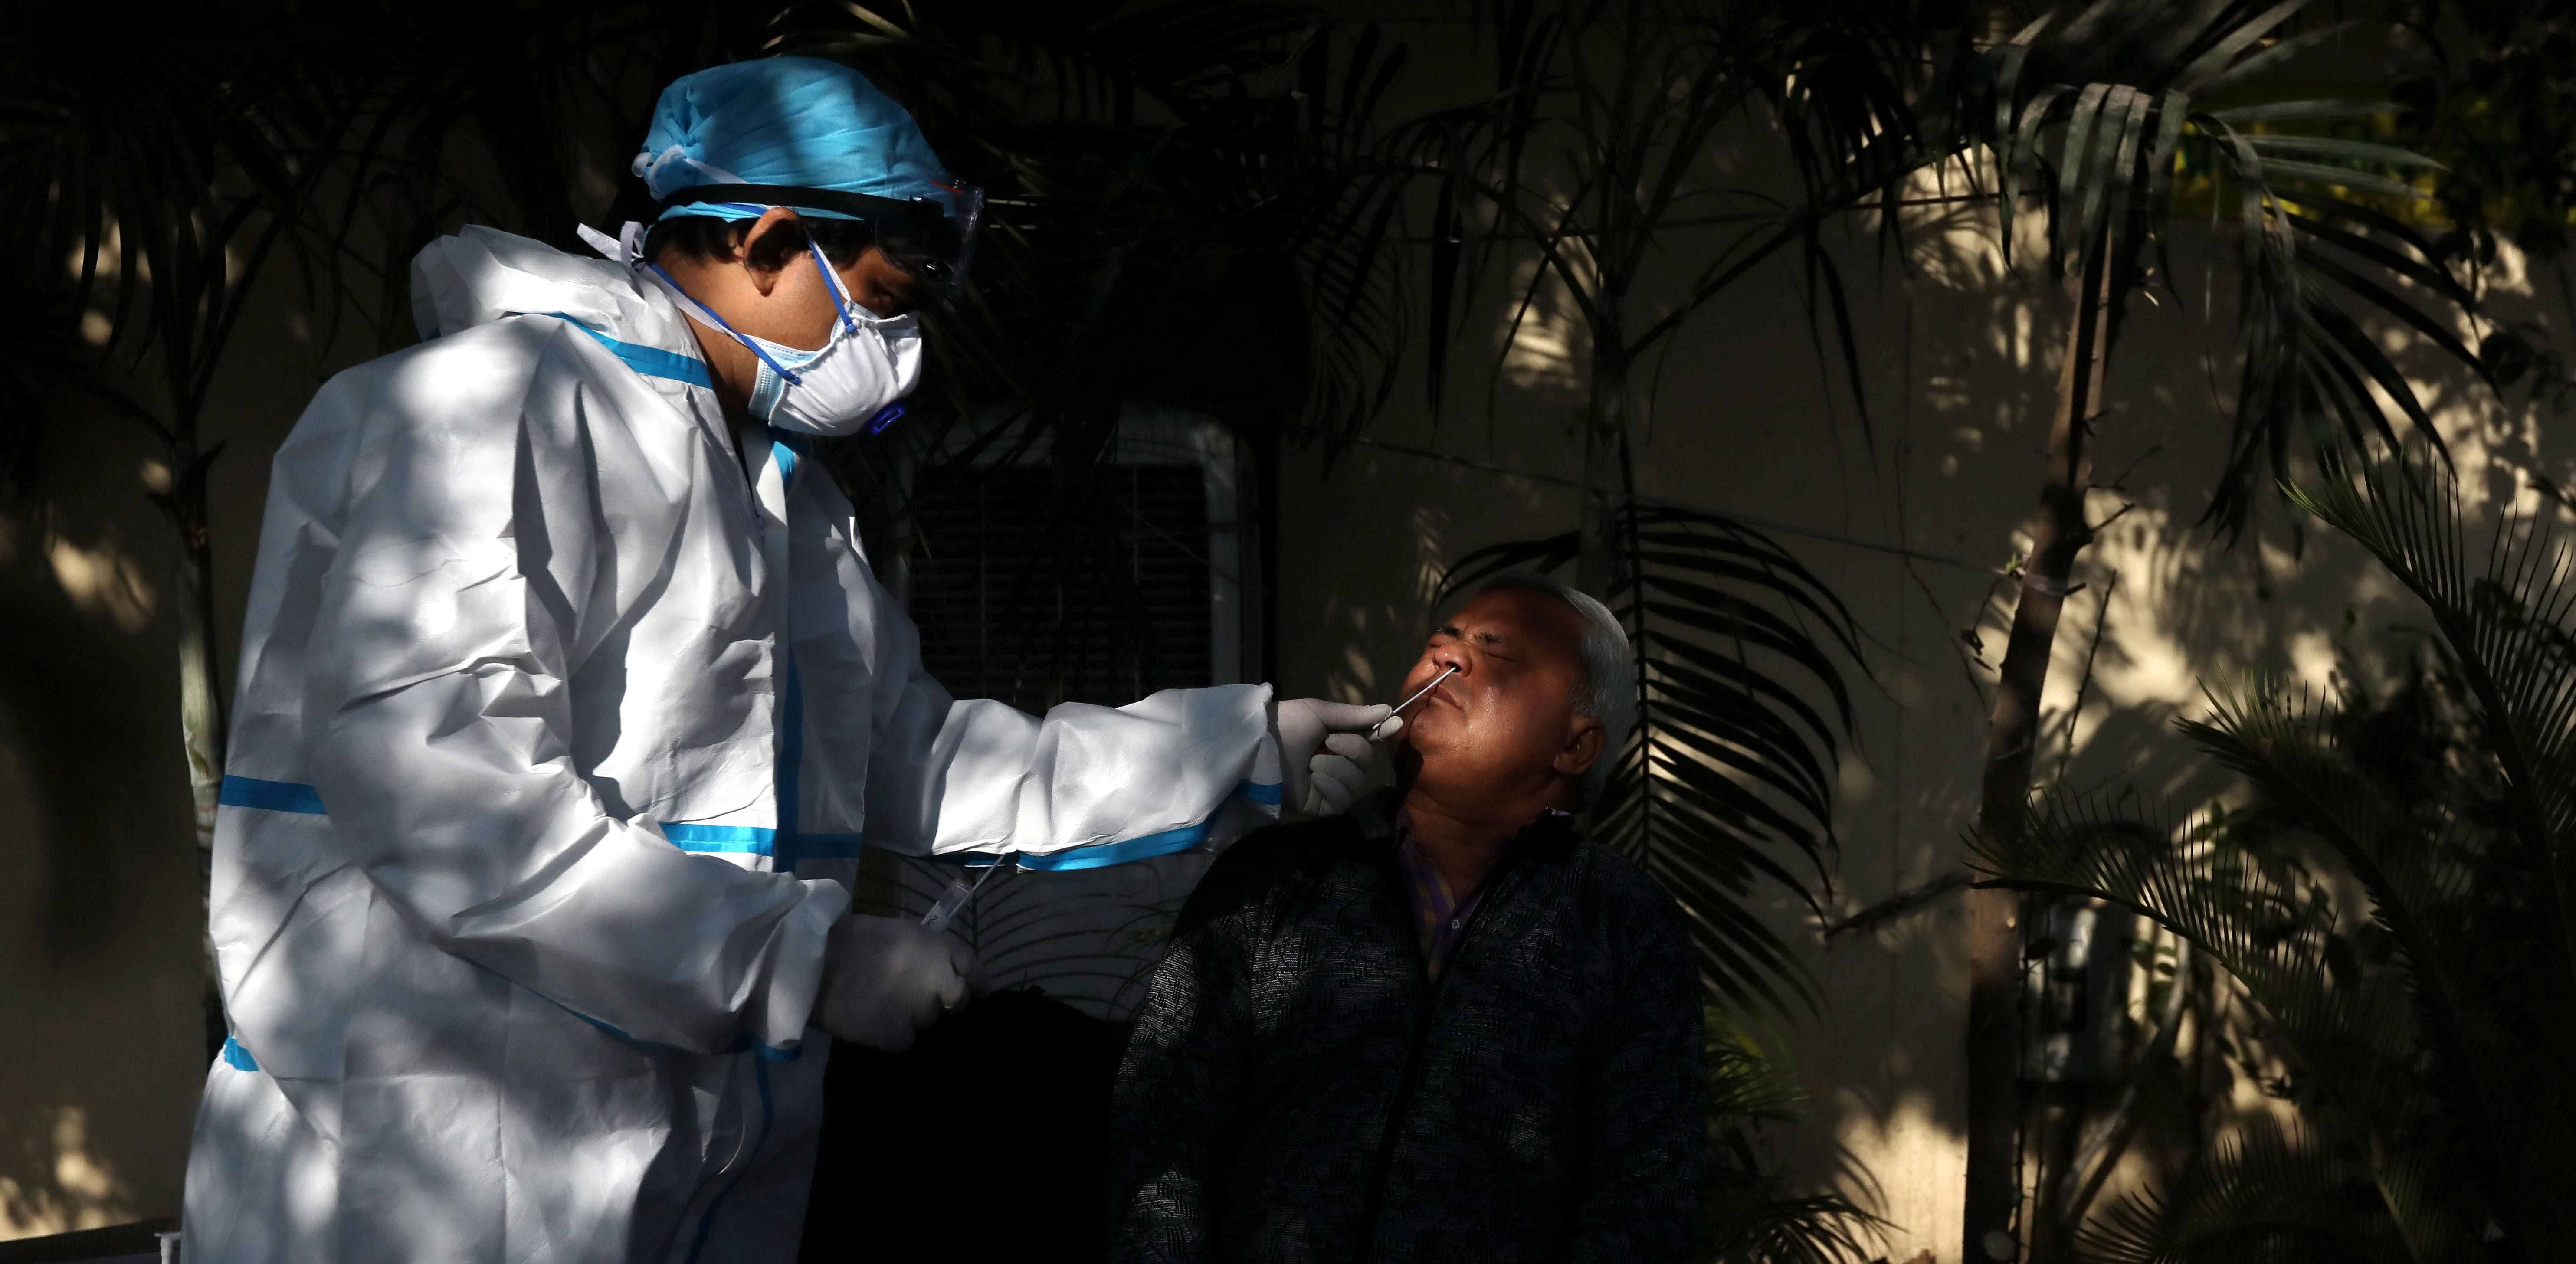 A healthcare worker wearing personal protective equipment (PPE) collects a swab sample from a man amidst the spread of the coronavirus disease (COVID-19), at a bus depot in New Delhi. Credit: Reuters